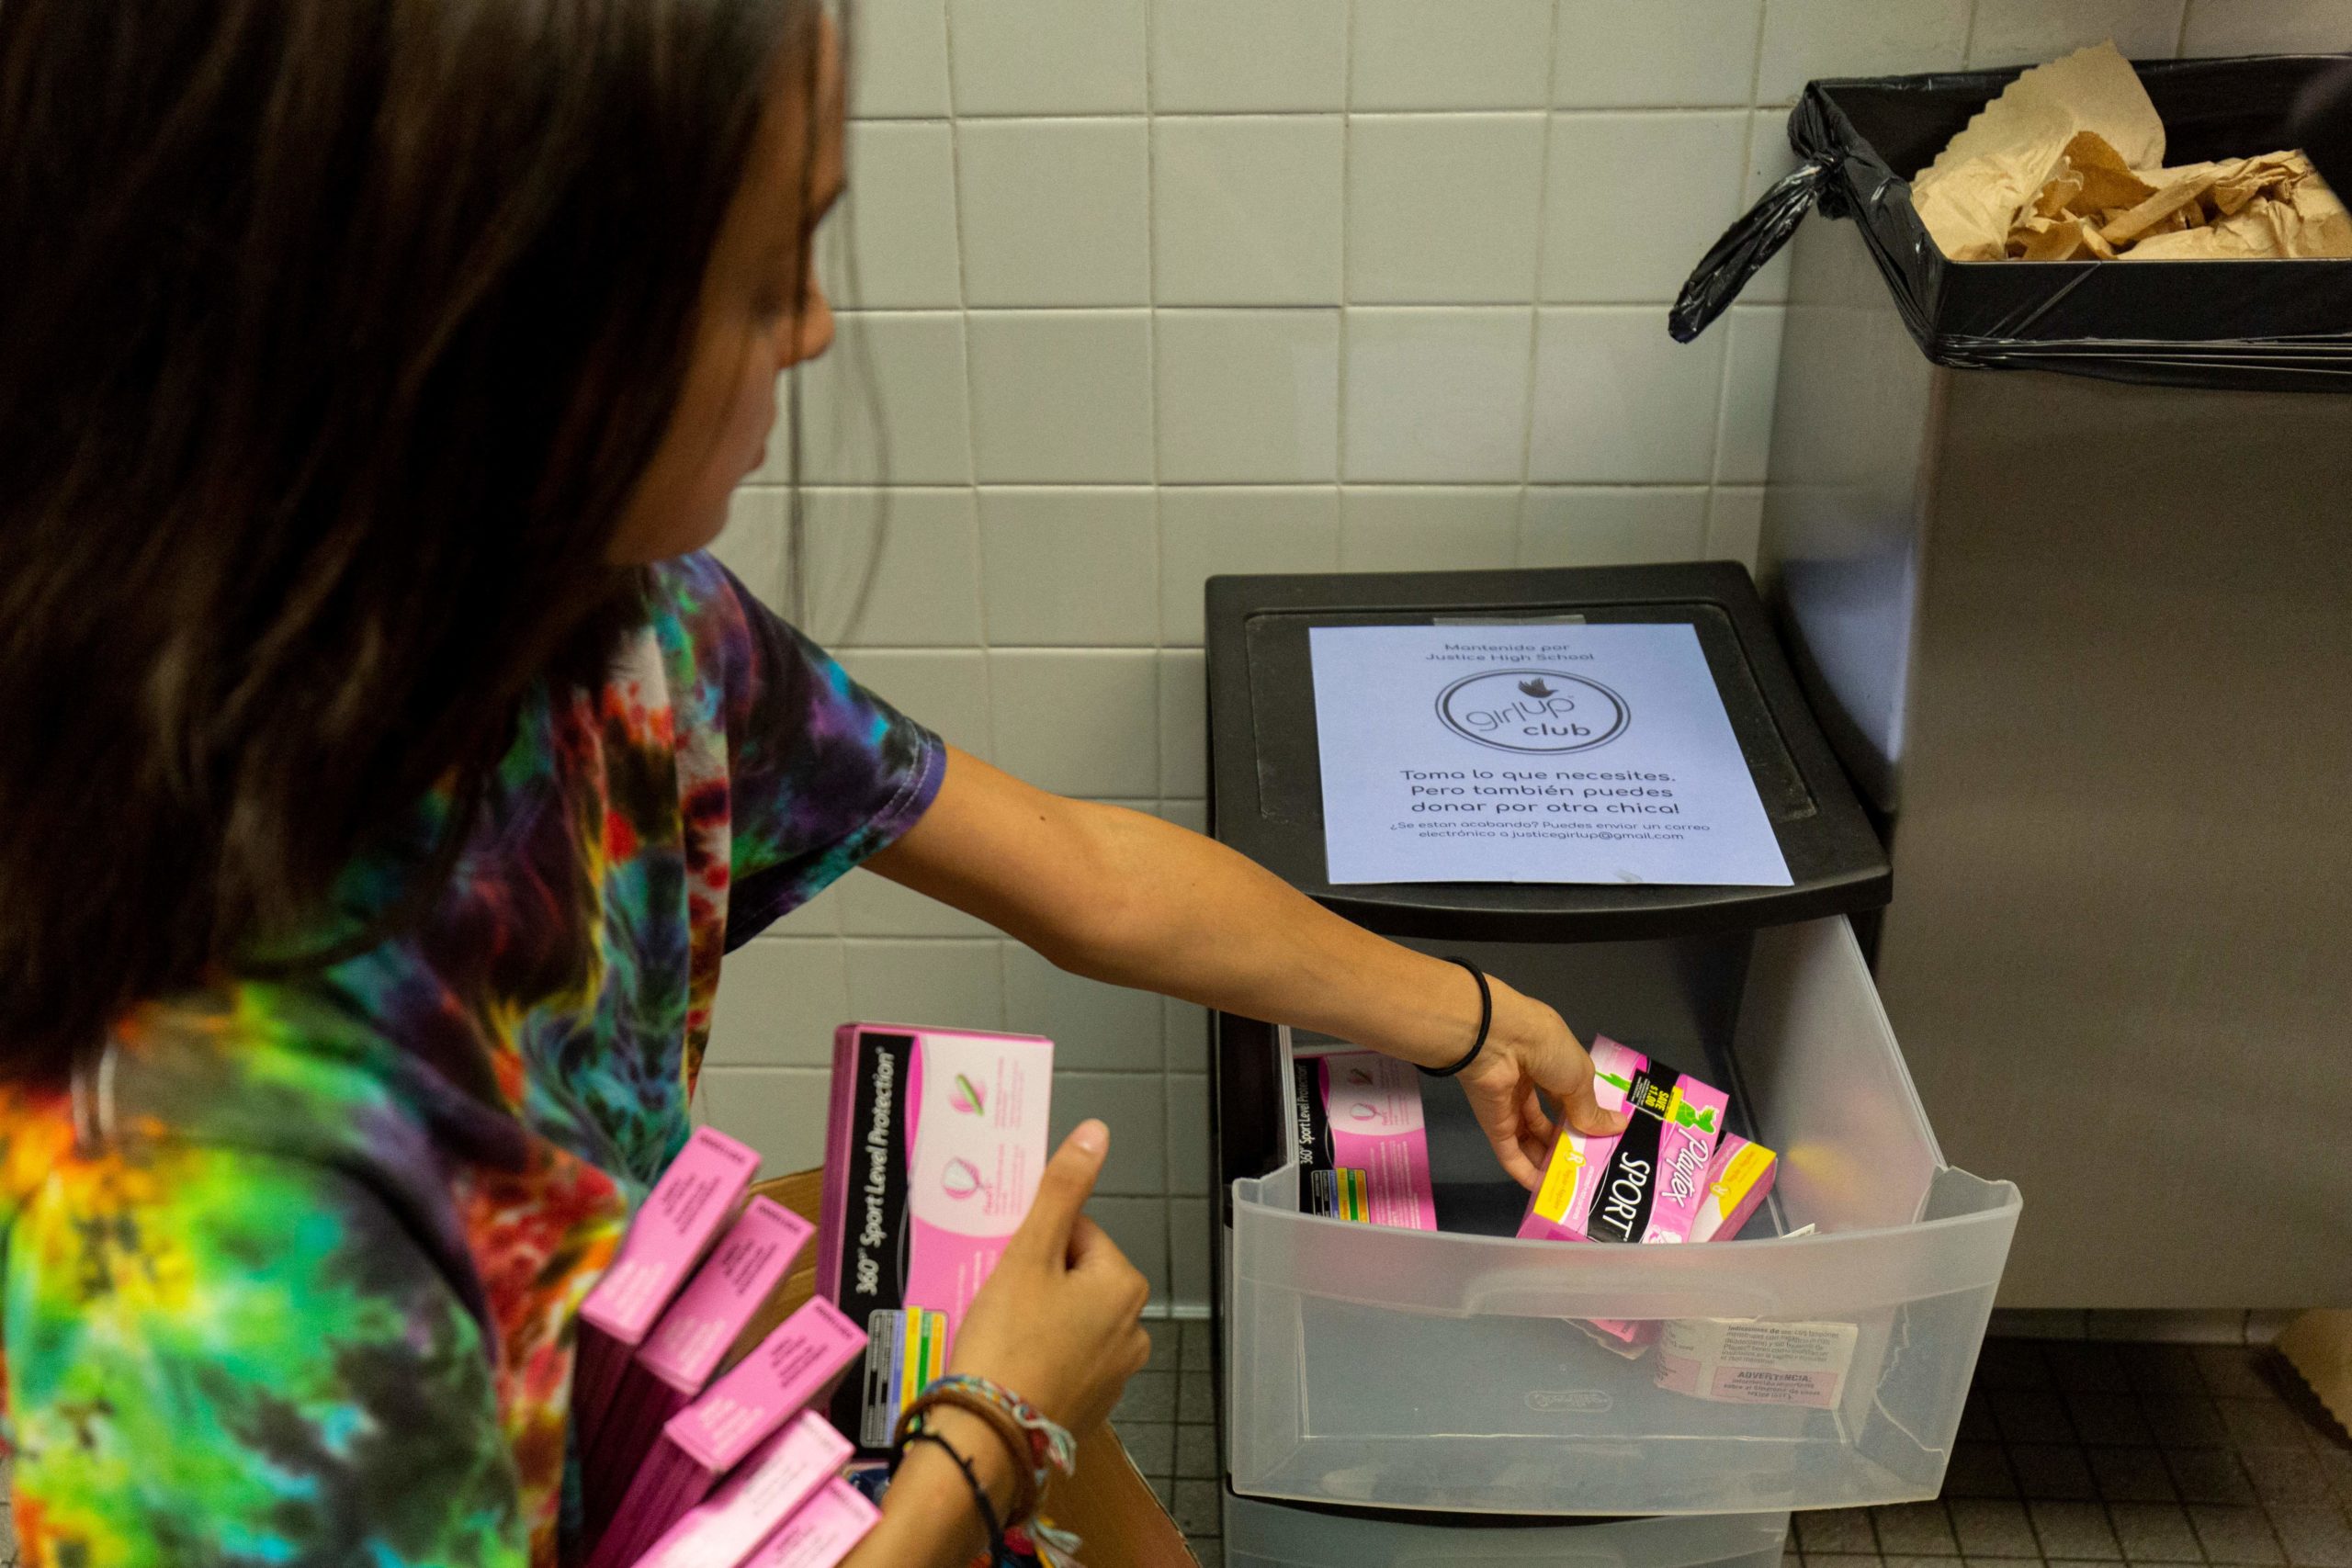 A student of the "Girl Up" club stocks a school bathroom with free pads and tampons to push for menstrual equity, at Justice High School in Falls Church, Virginia, on September 11, 2019. (Photo by Alastair Pike / AFP via Getty Images)